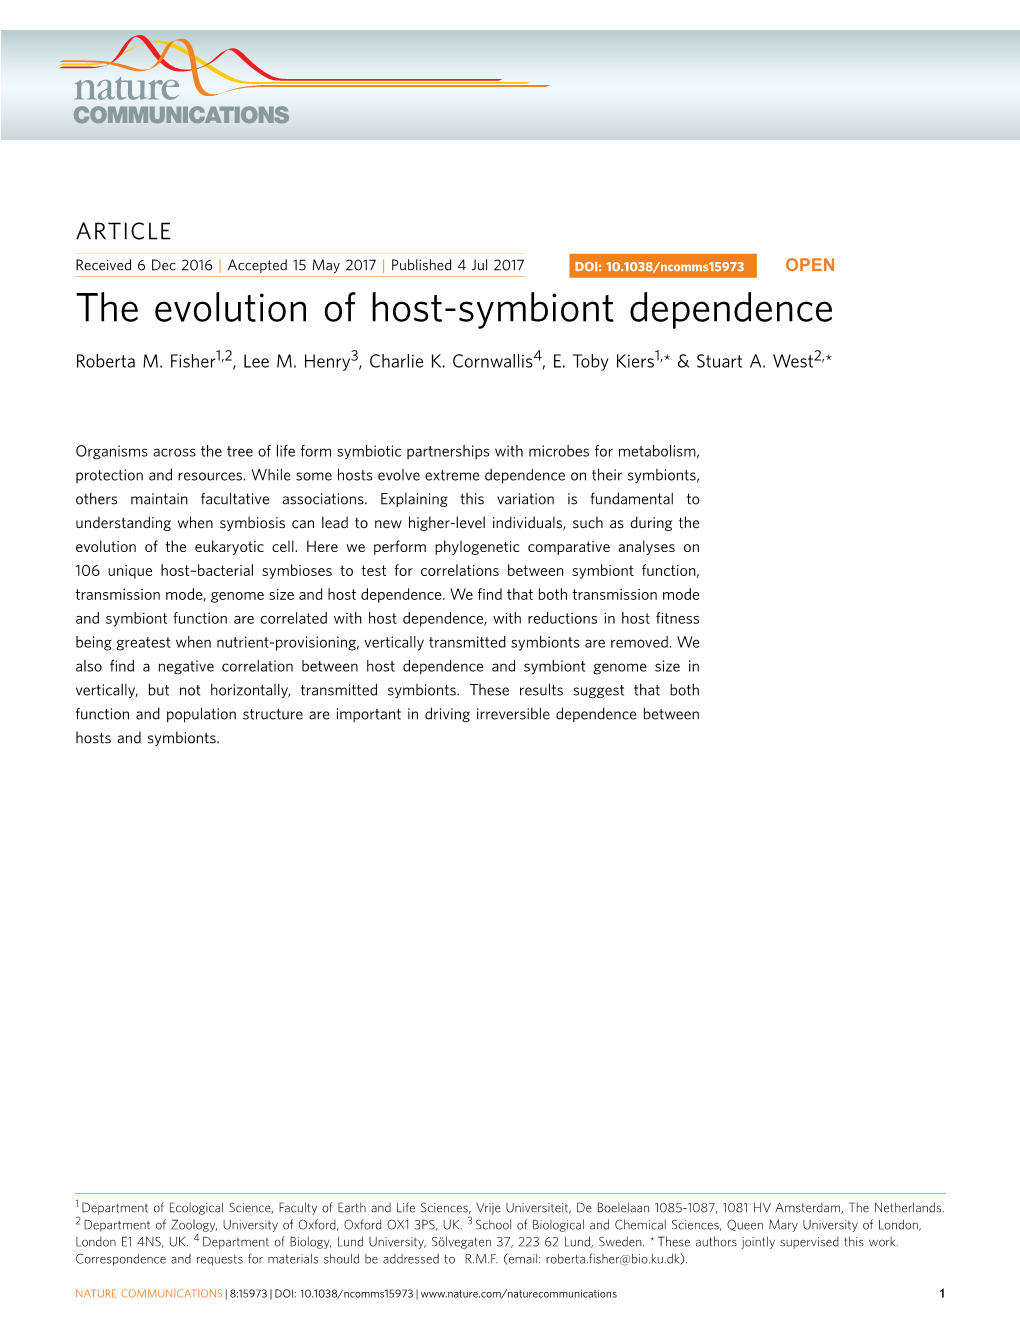 The Evolution of Host-Symbiont Dependence